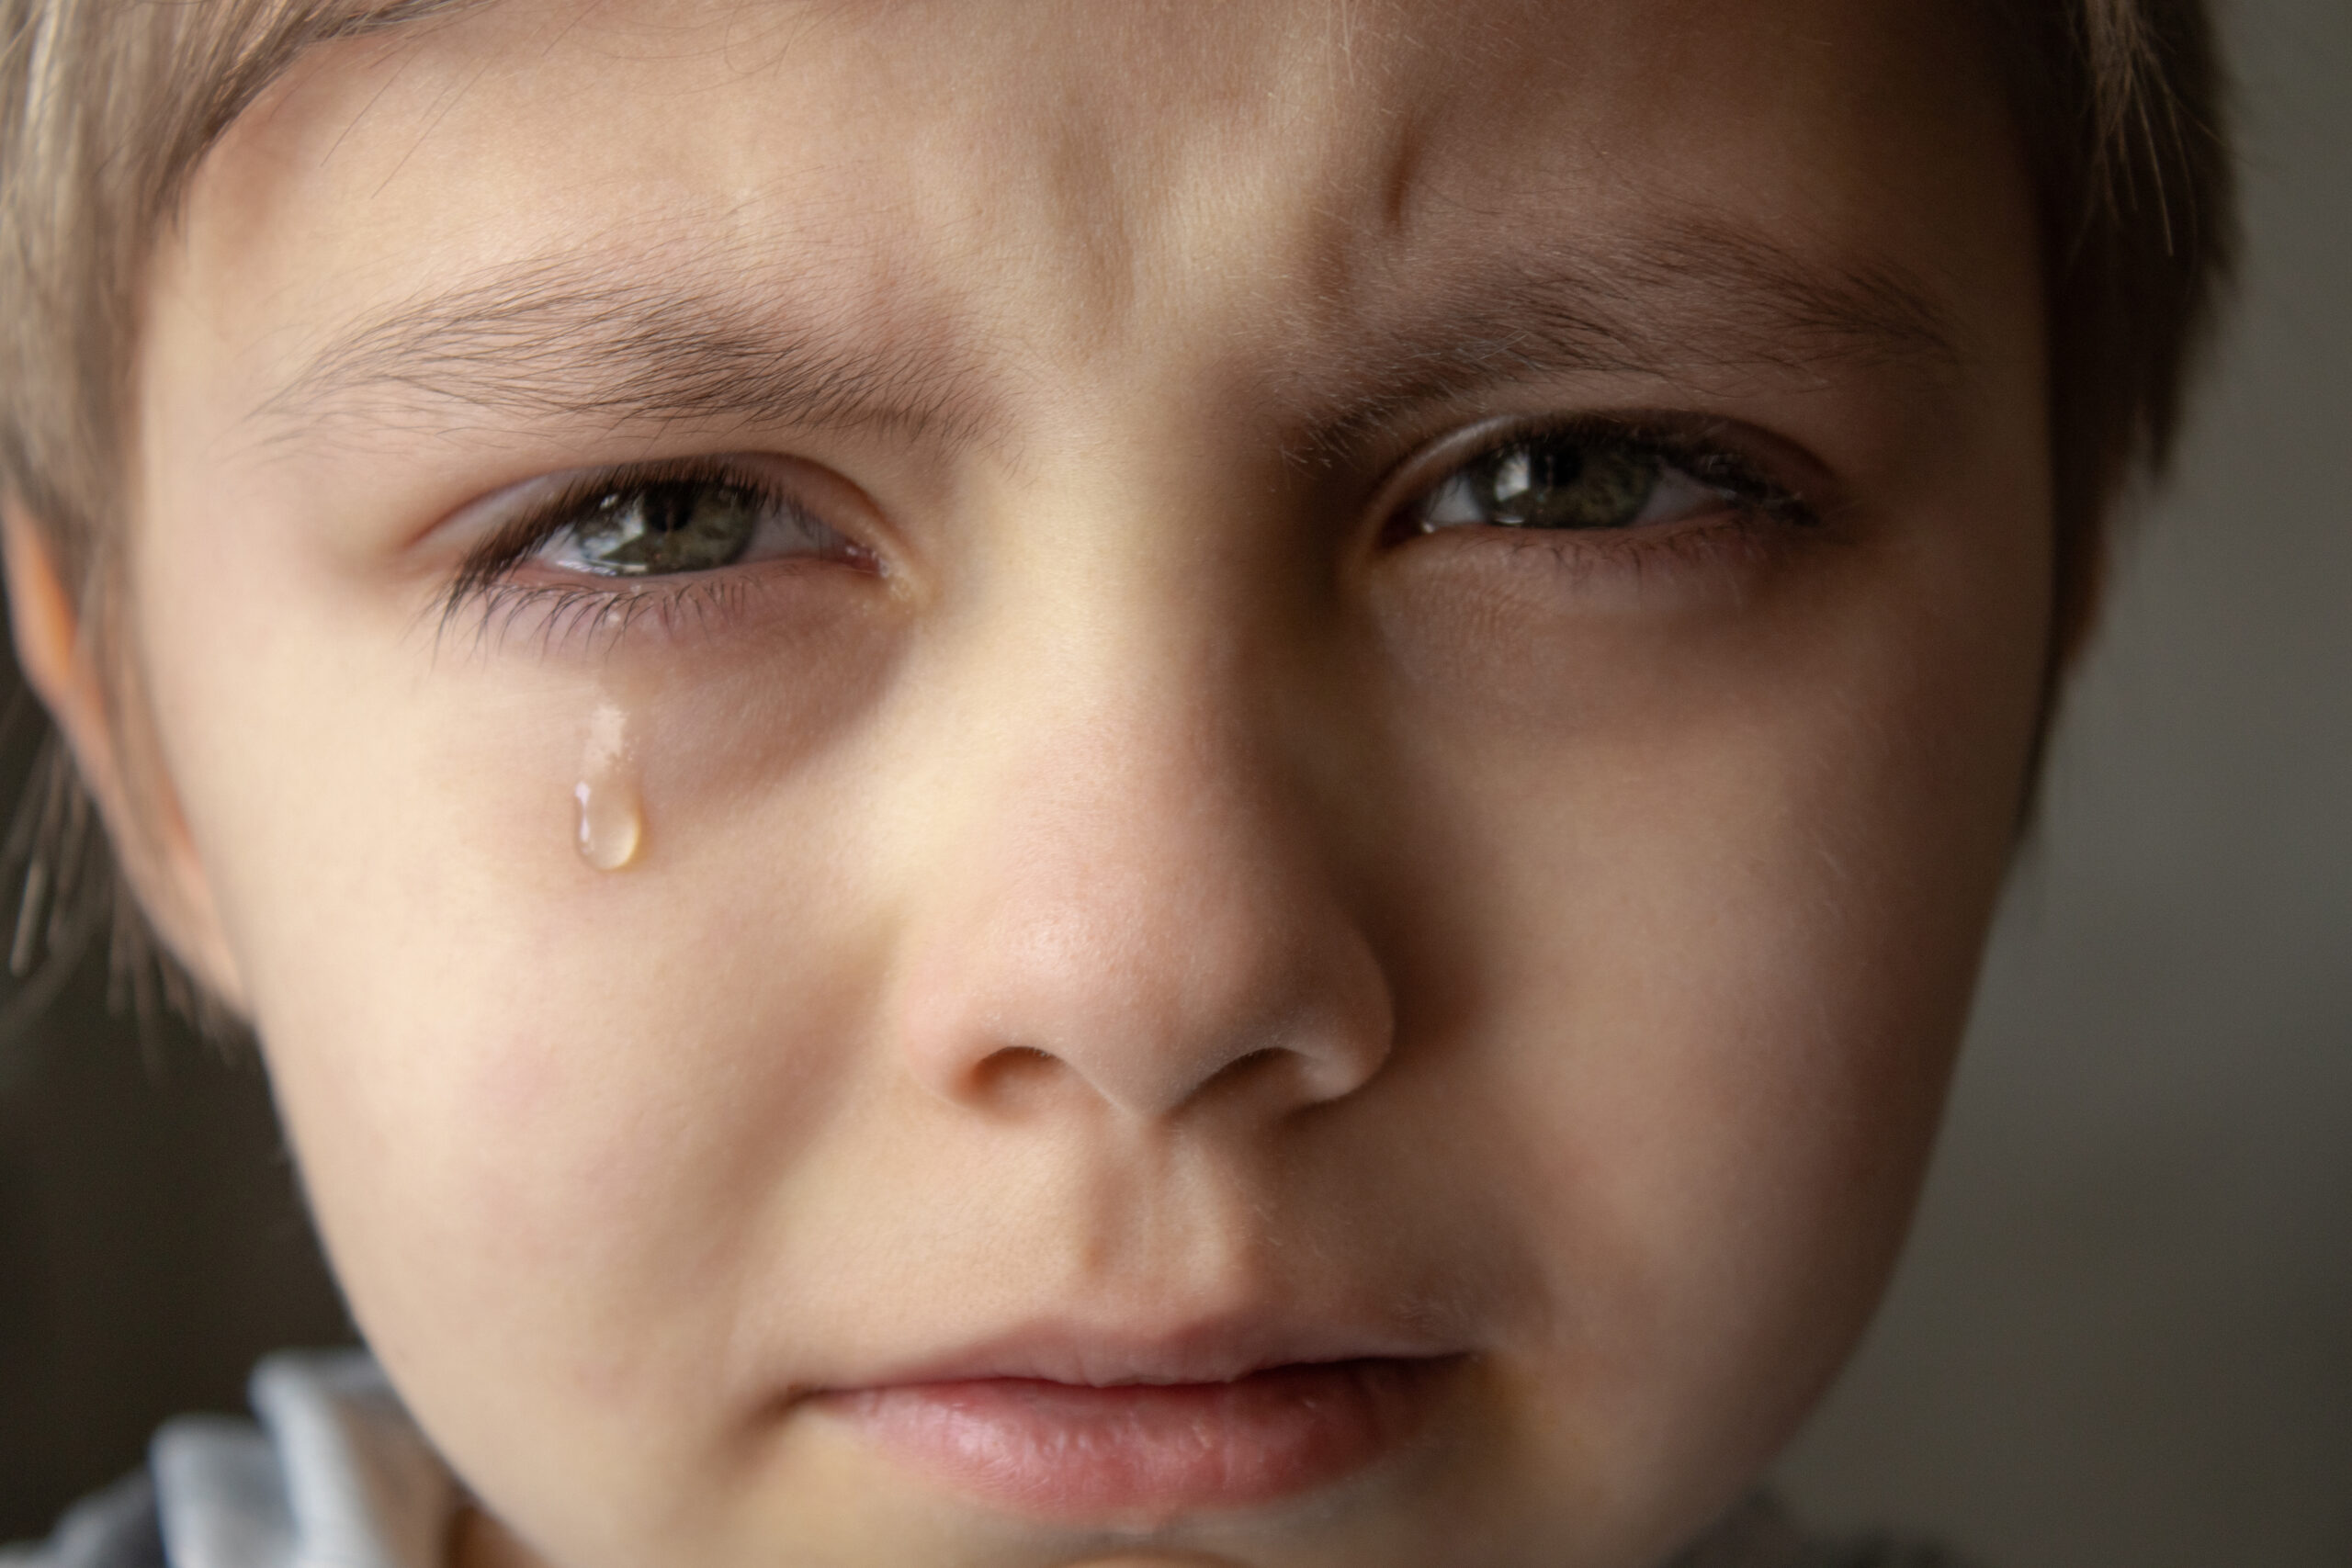 Tears in the eyes of a child. A tear on the boy's cheek.